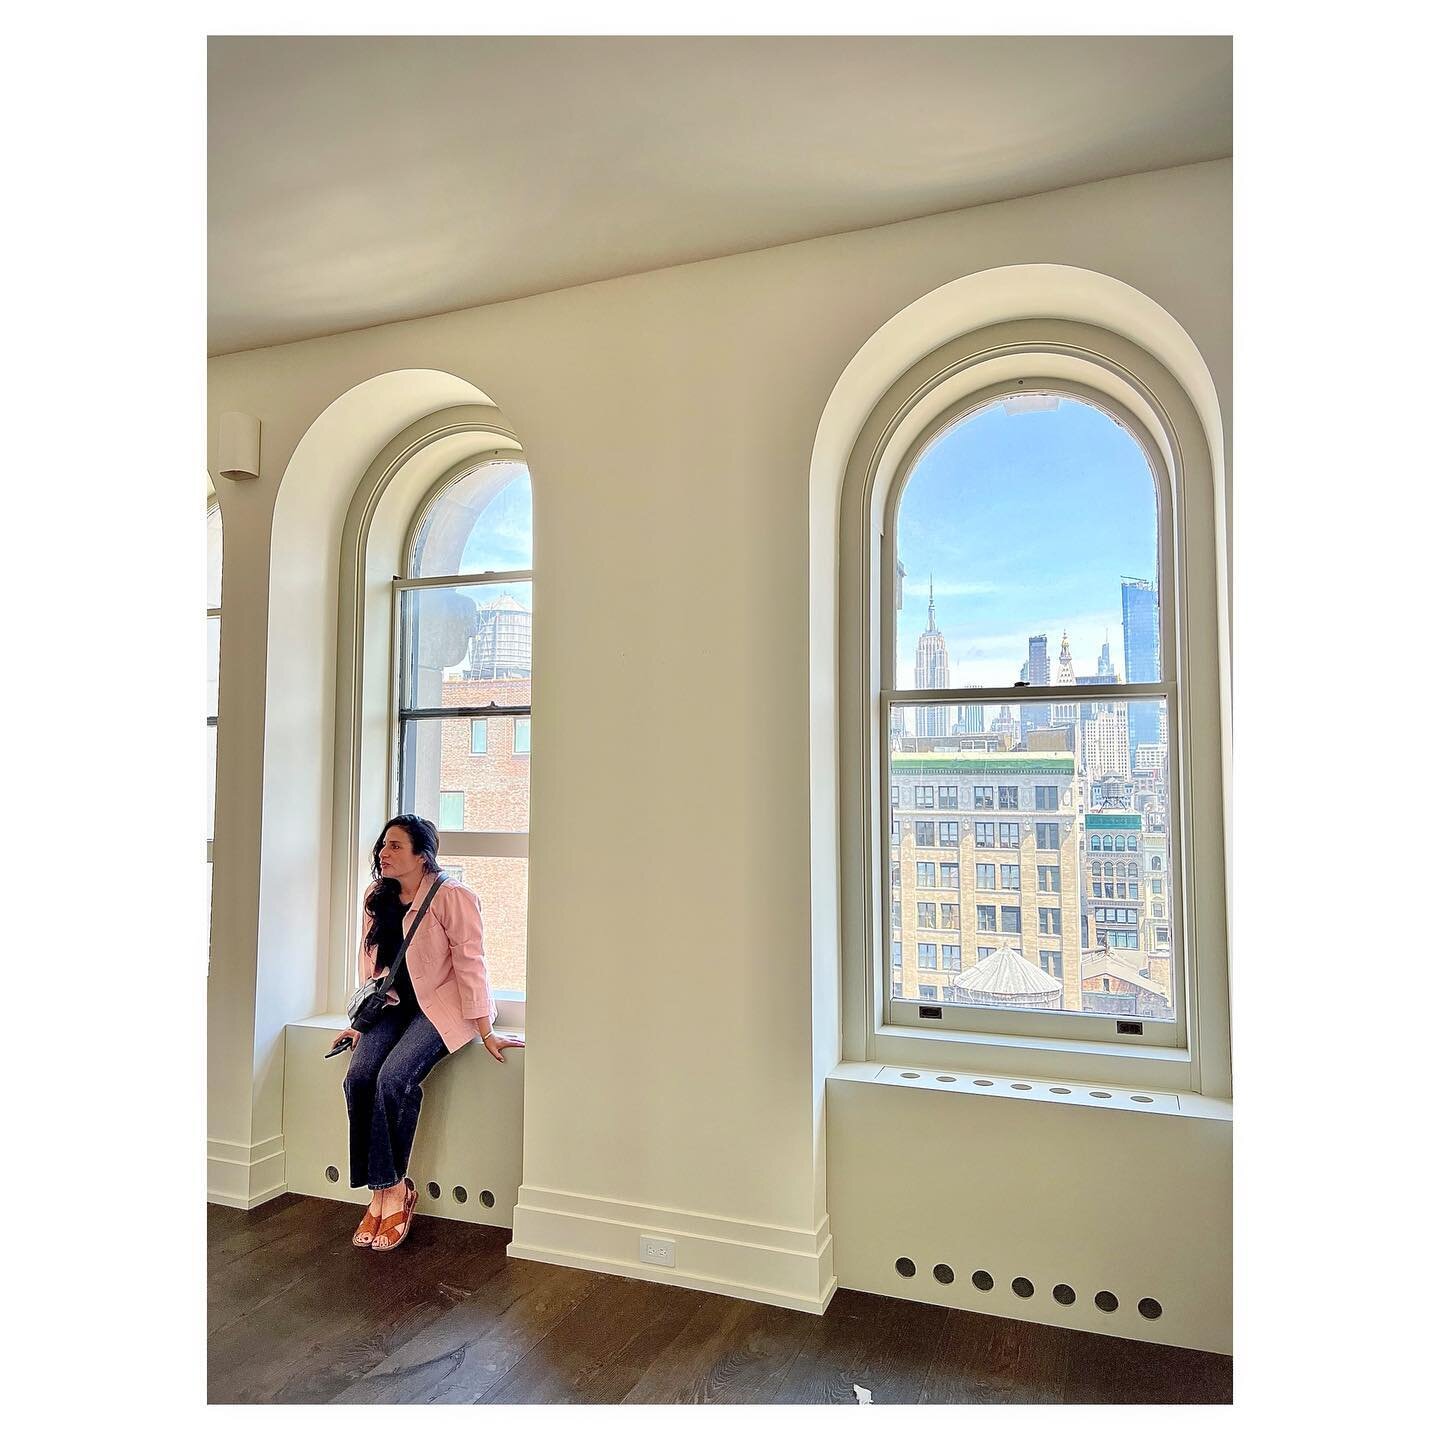 The last few months have been extra heavy in our world. I&rsquo;m fortunate to have design as a distraction and an outlet. 

If someone would have told me as a young woman I would be decorating this quintessential NYC apartment someday, I would never